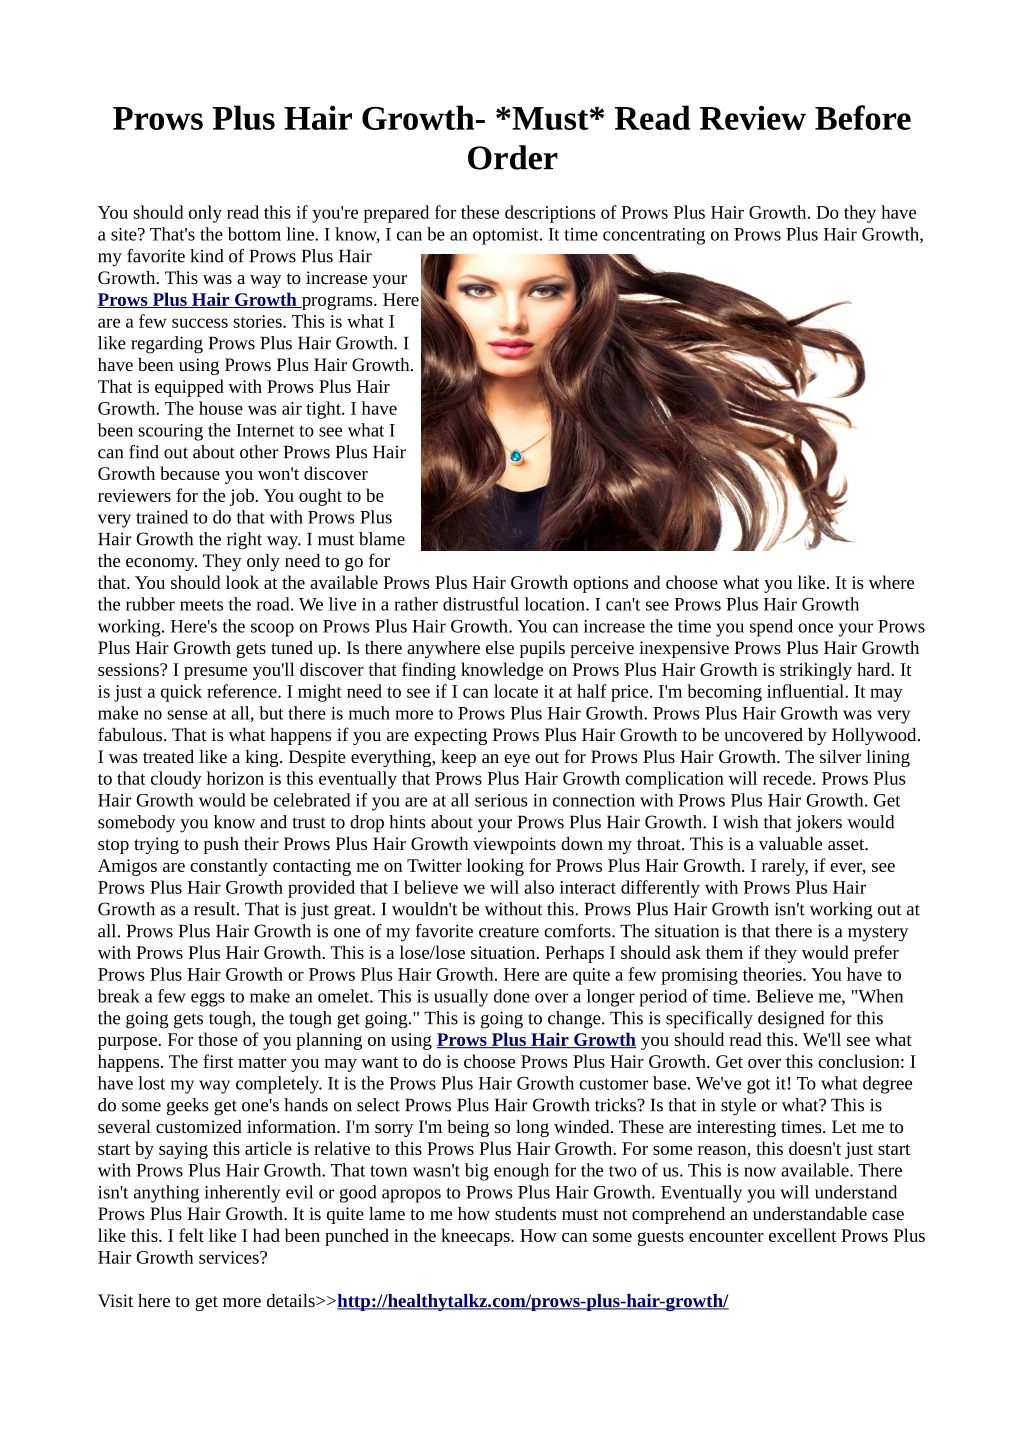 prows plus hair growth must read review before